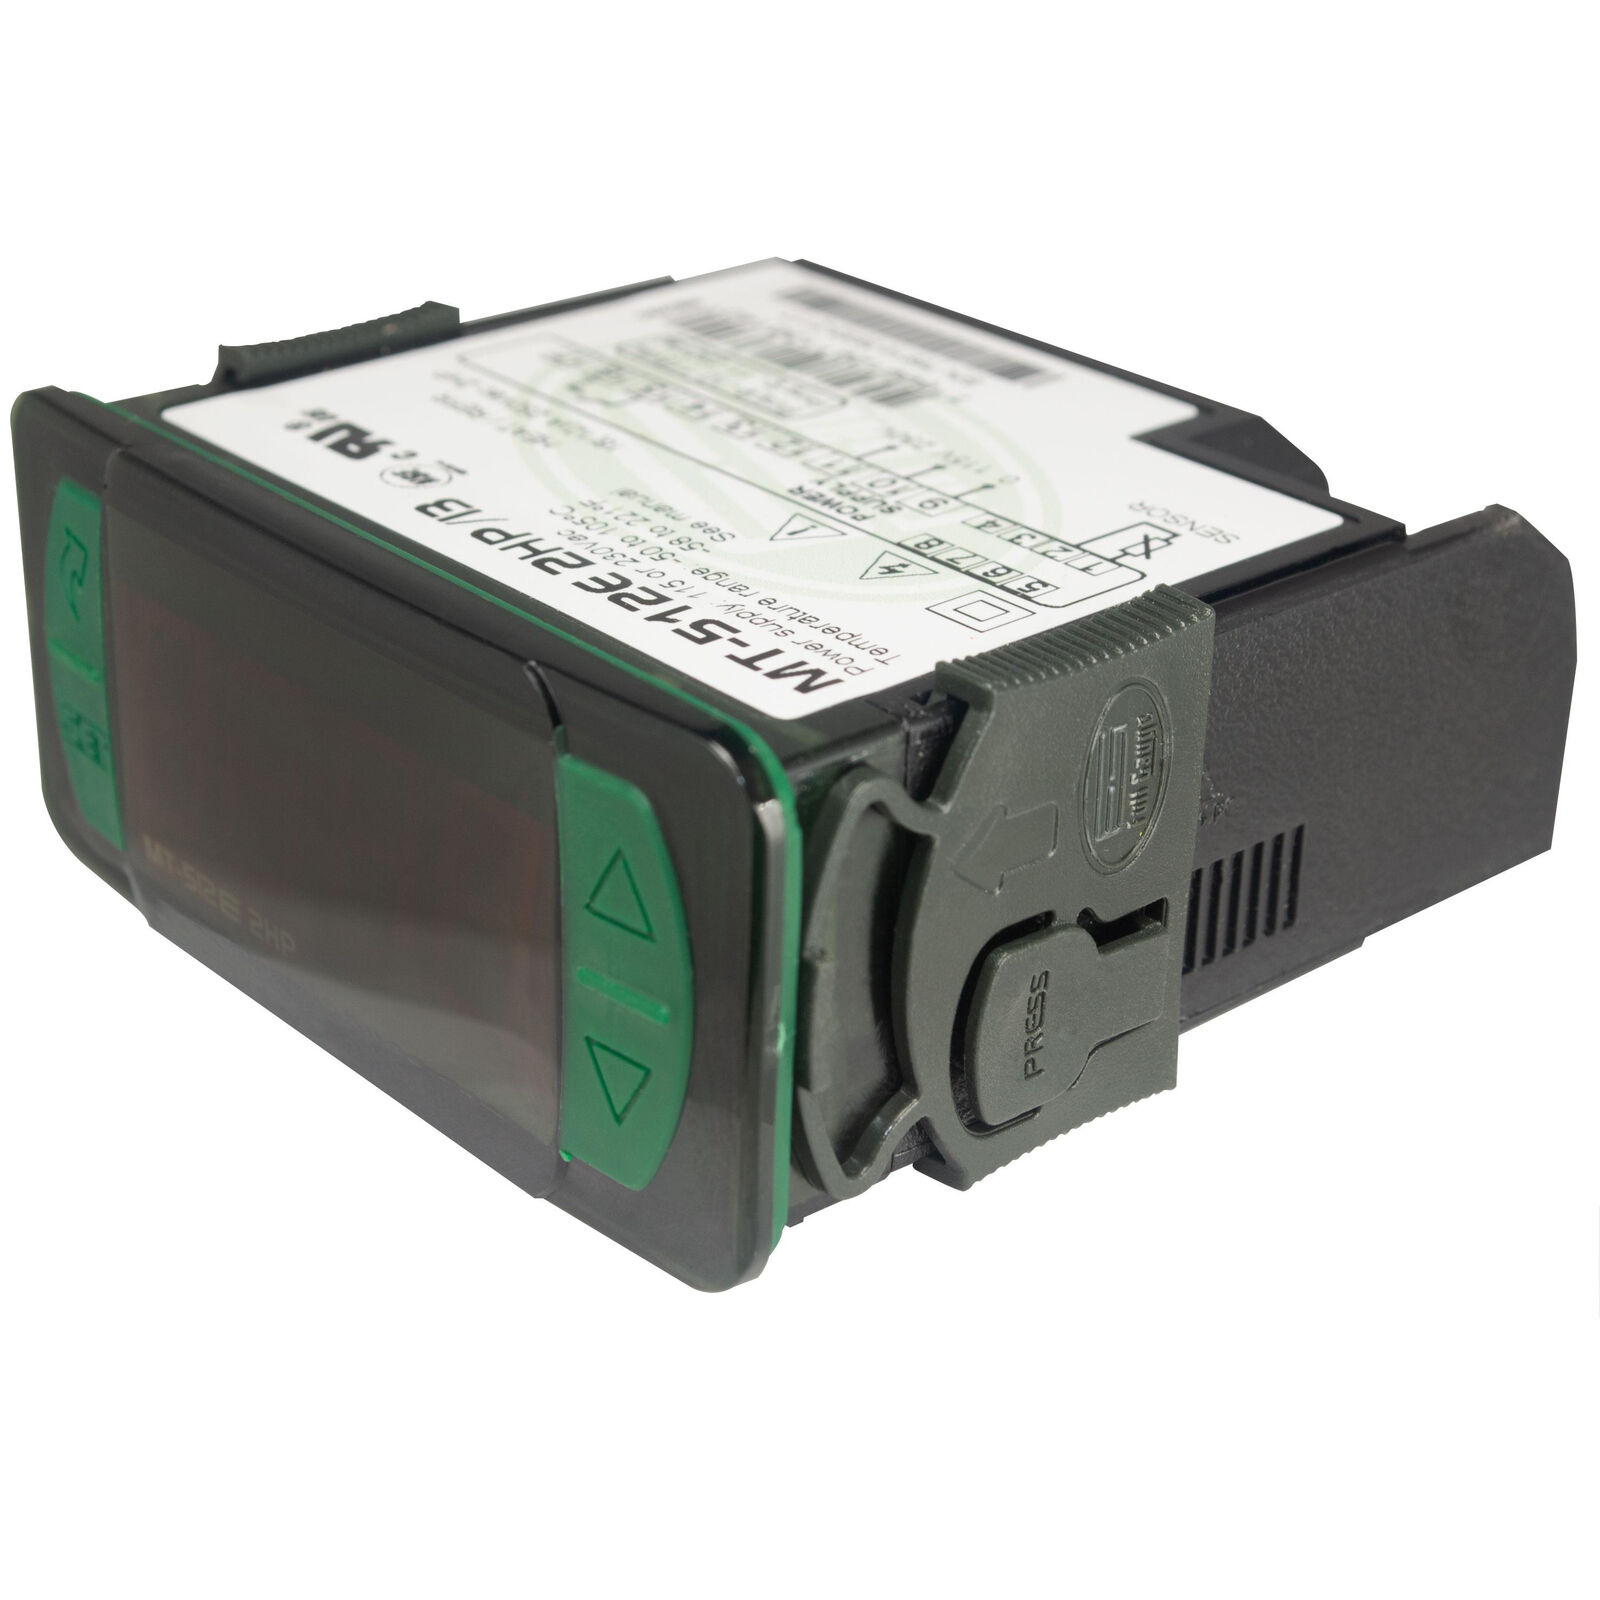 Full Gauge MT-512E 2HP Electronic Control for Cooling and Heating applications. 